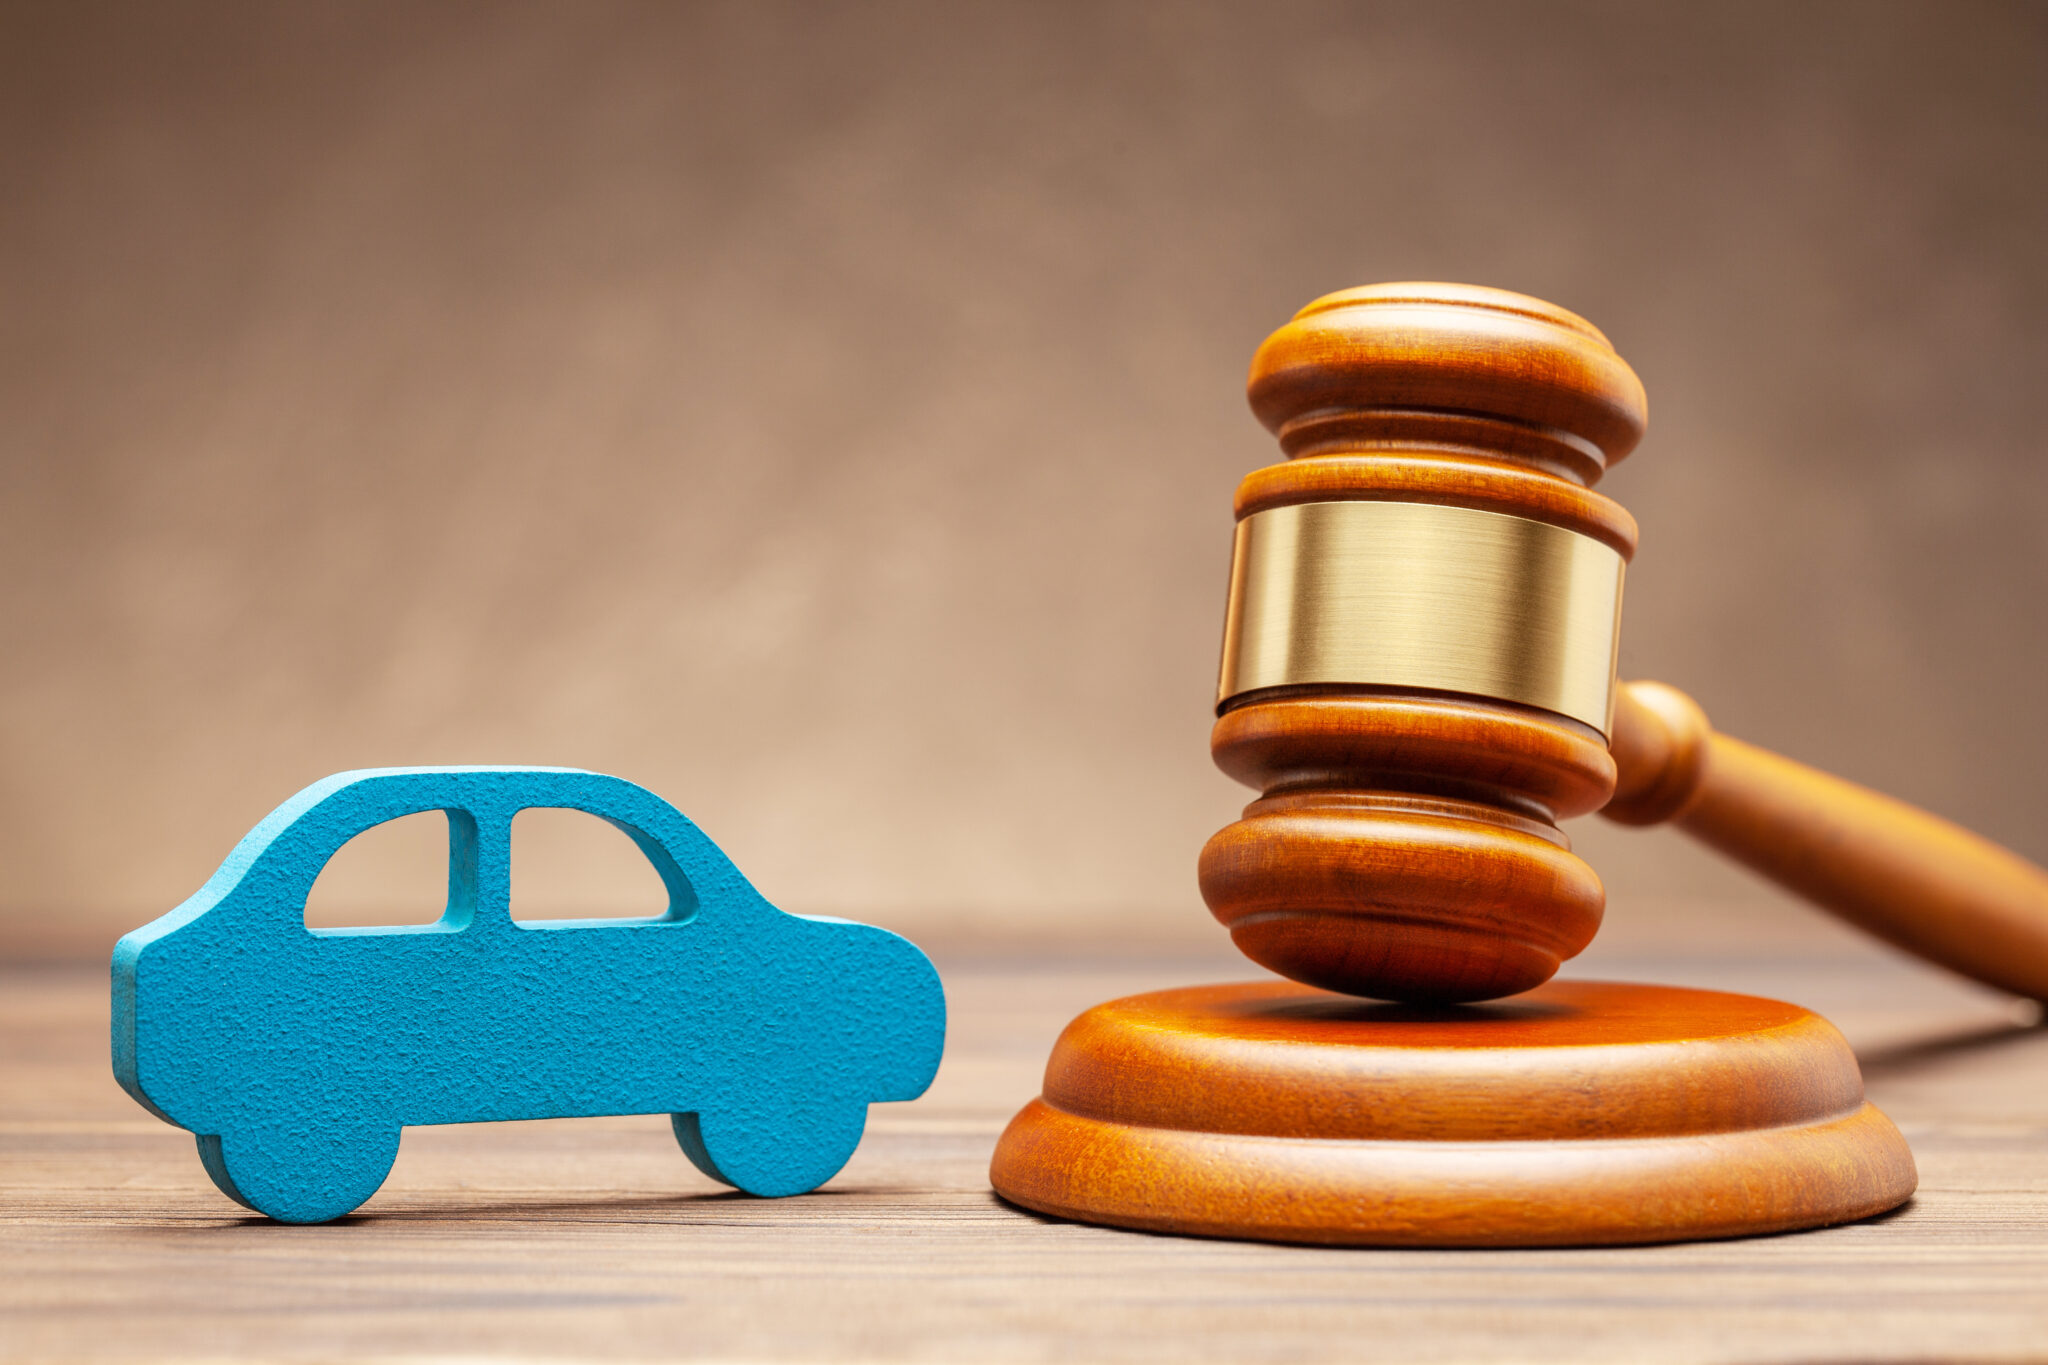 Car and judge gavel on brown background